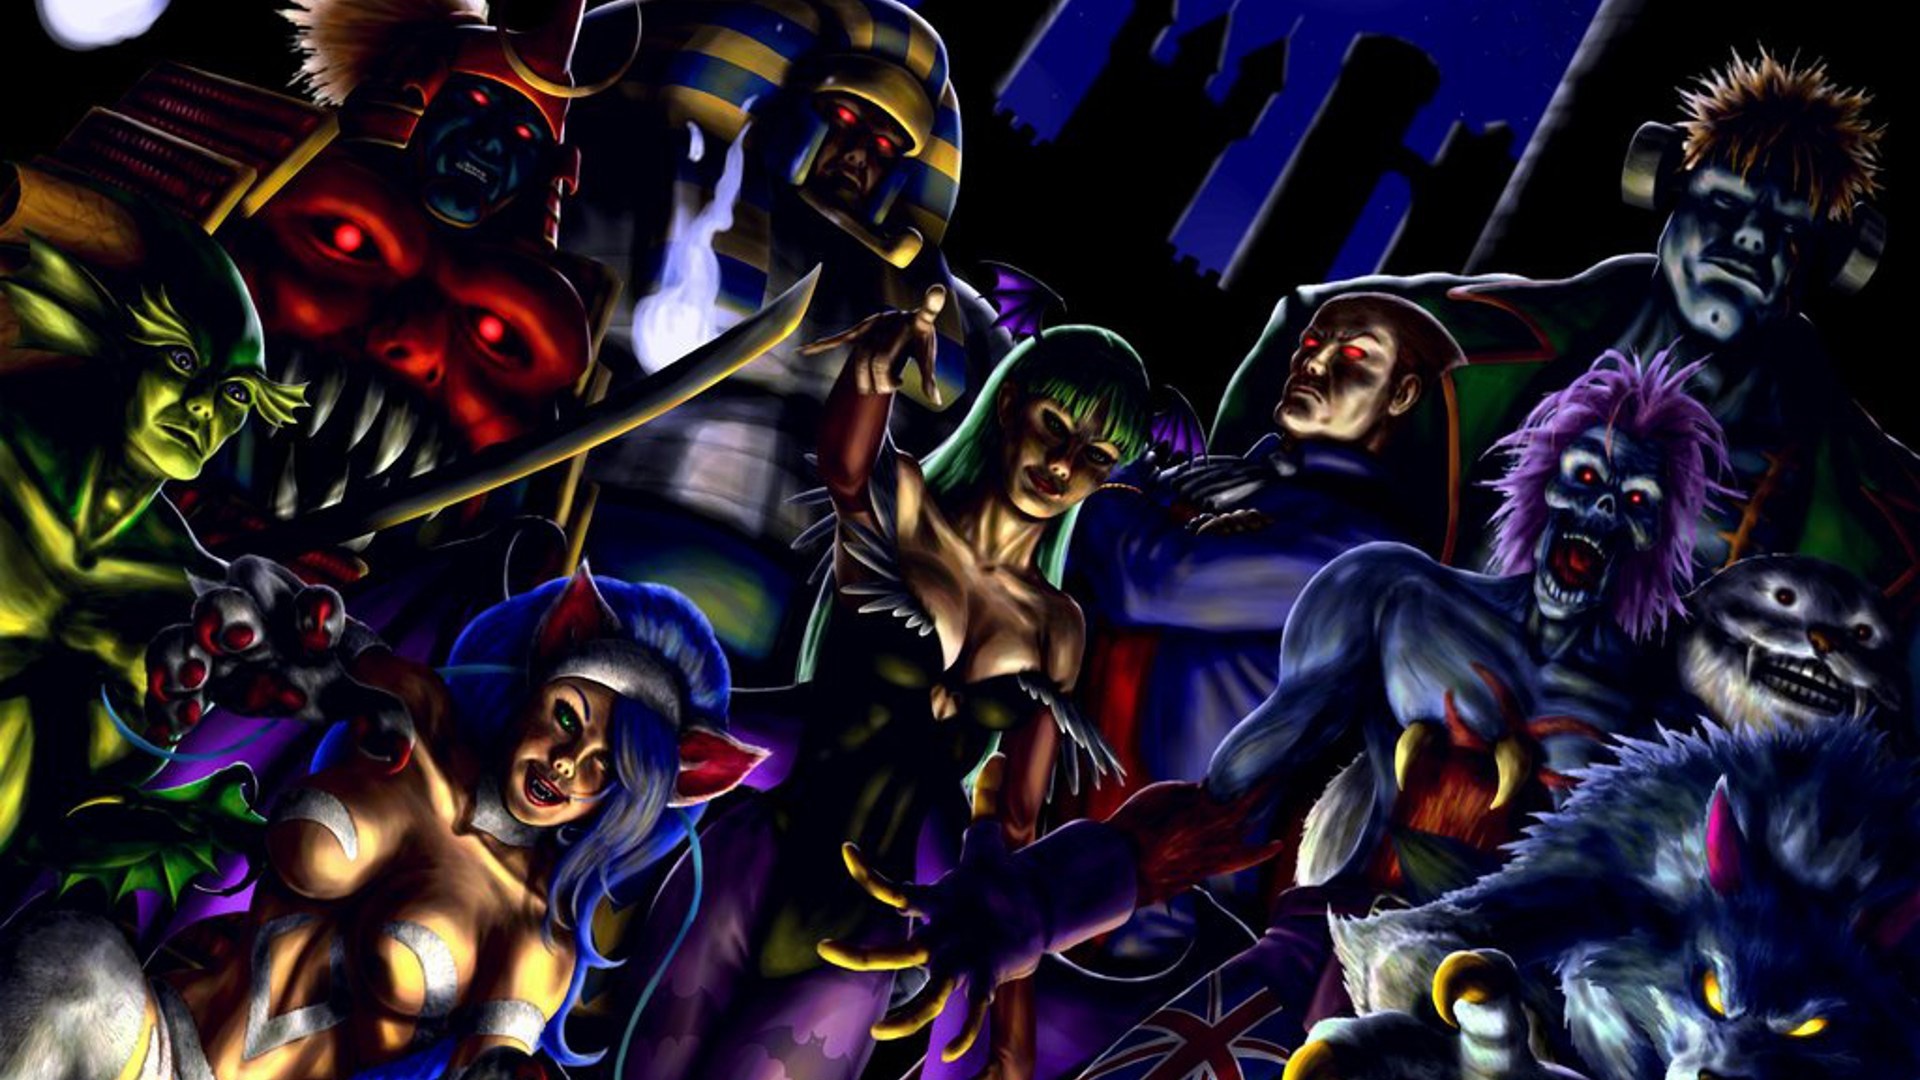 1920x1080 Darkstalkers Wallpapers Wallpapers) – Wallpapers and Backgrounds